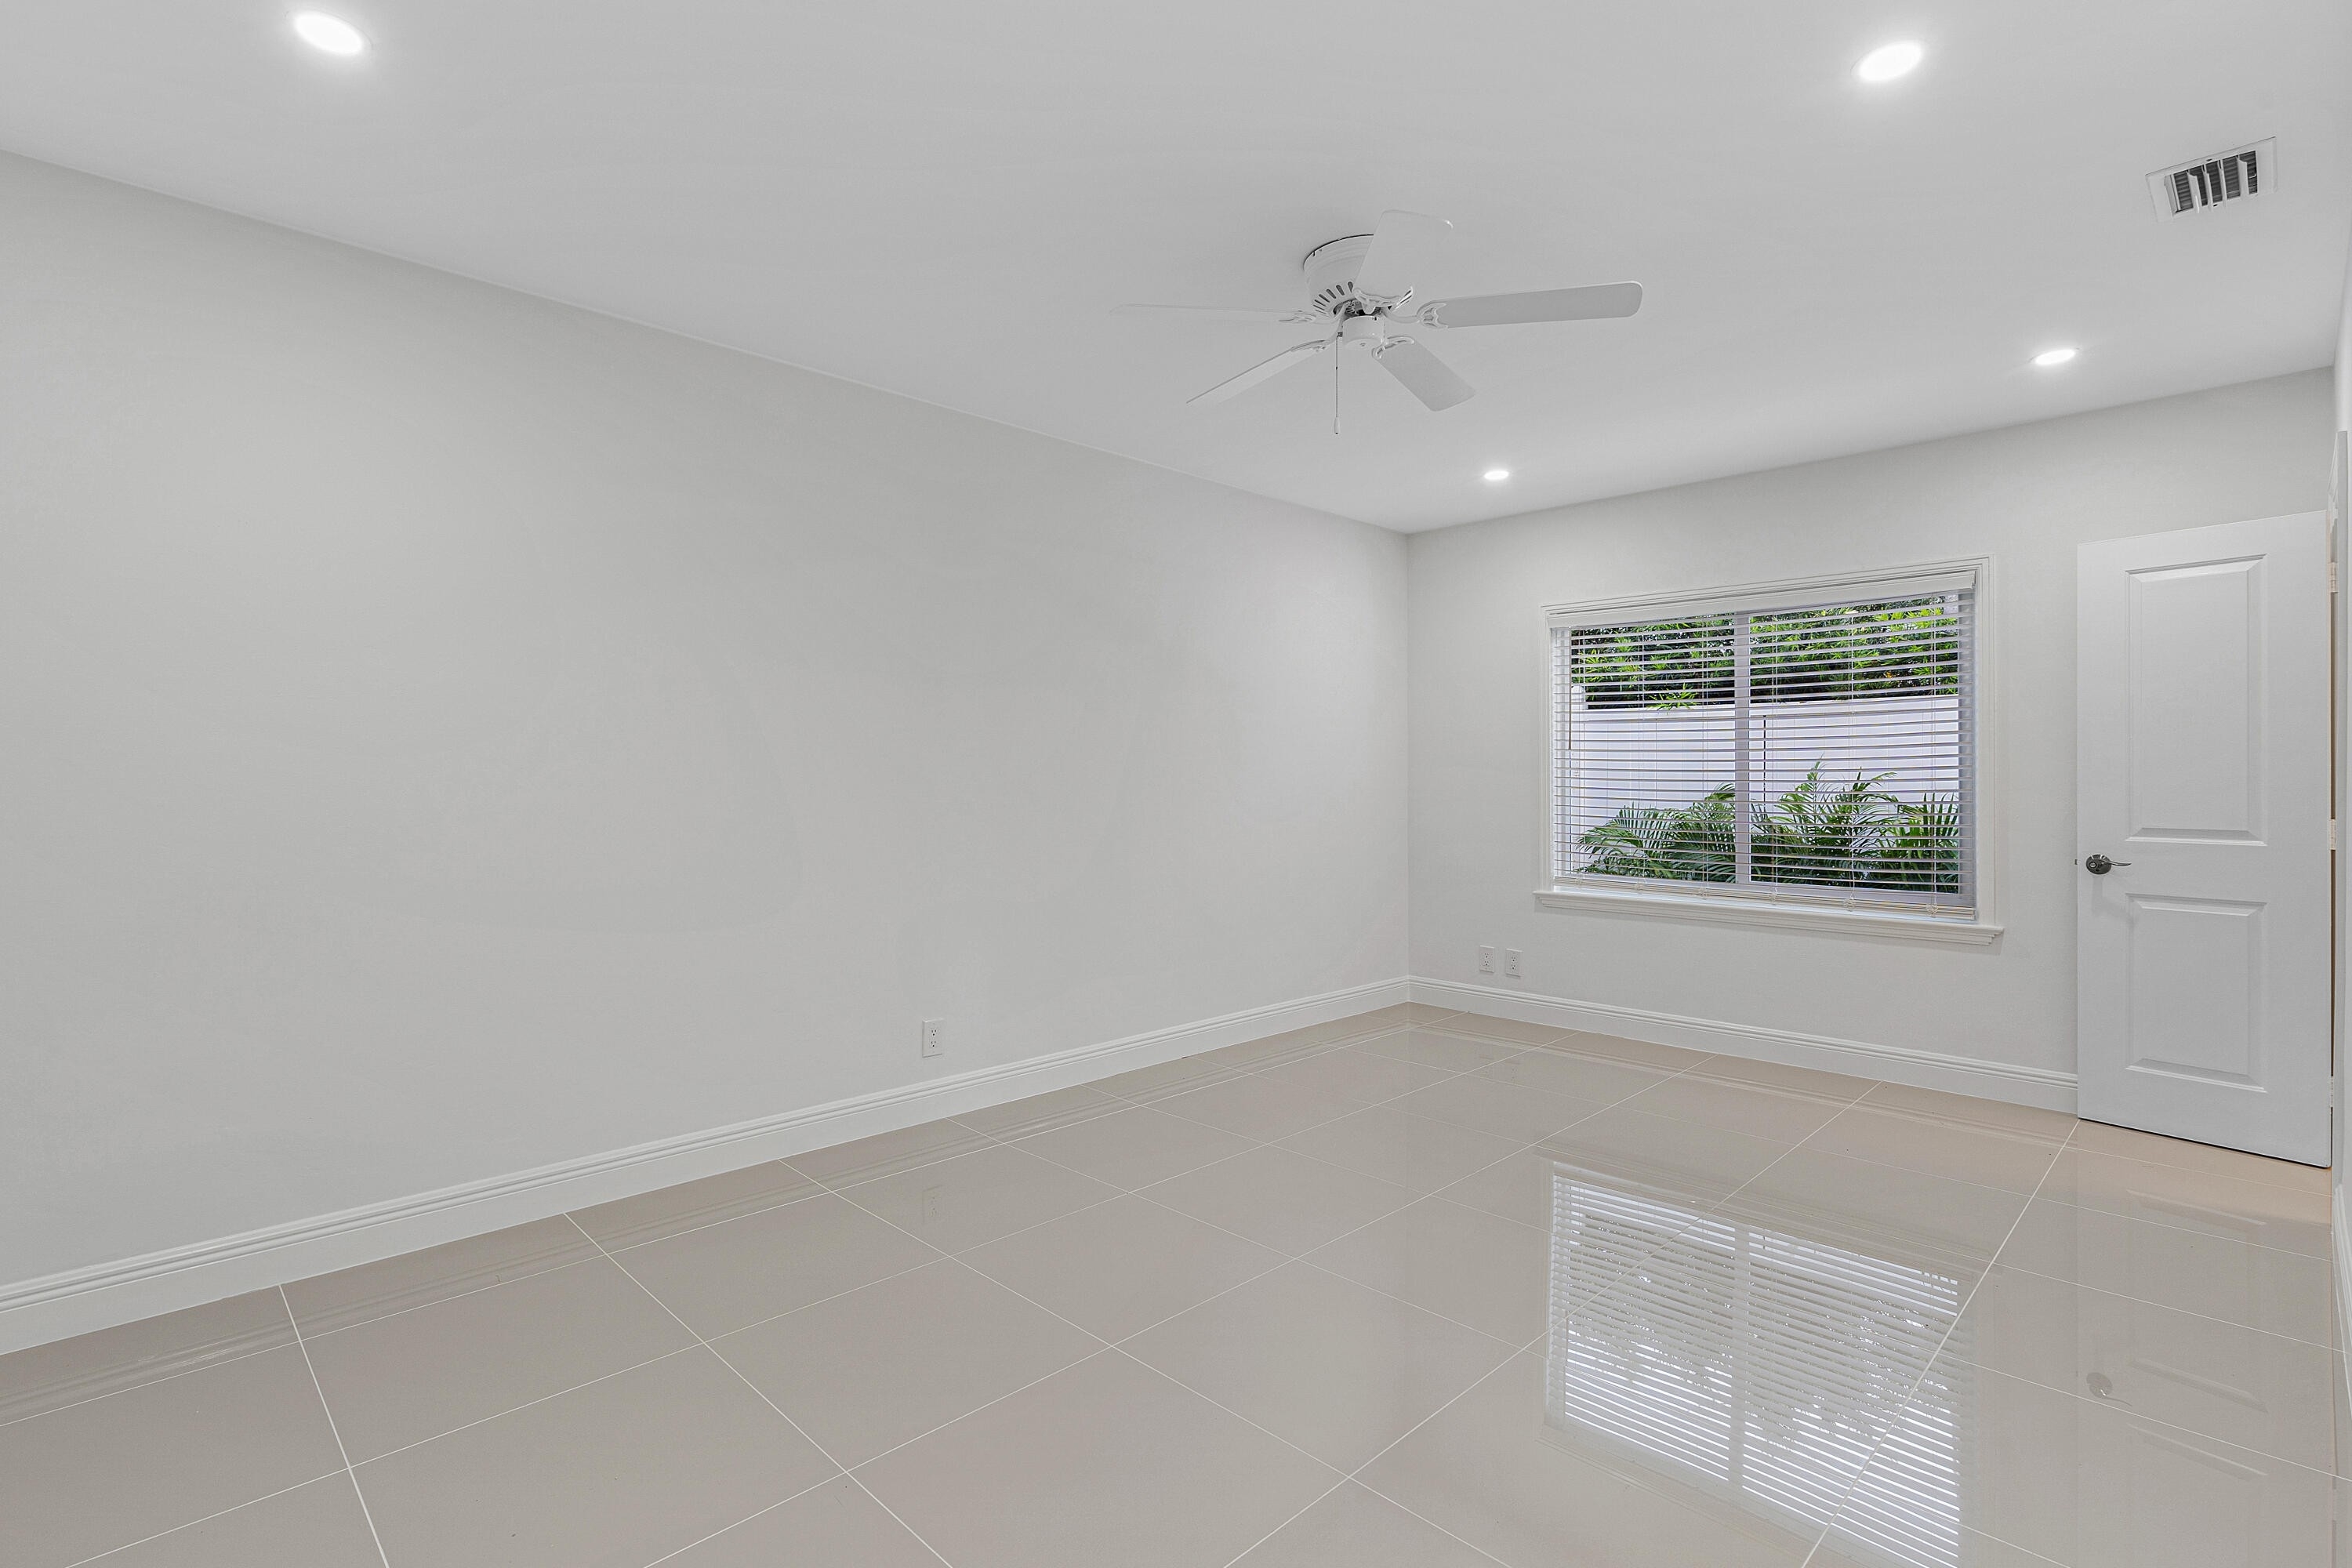 29. Single Family Homes for Sale at South End, West Palm Beach, FL 33405